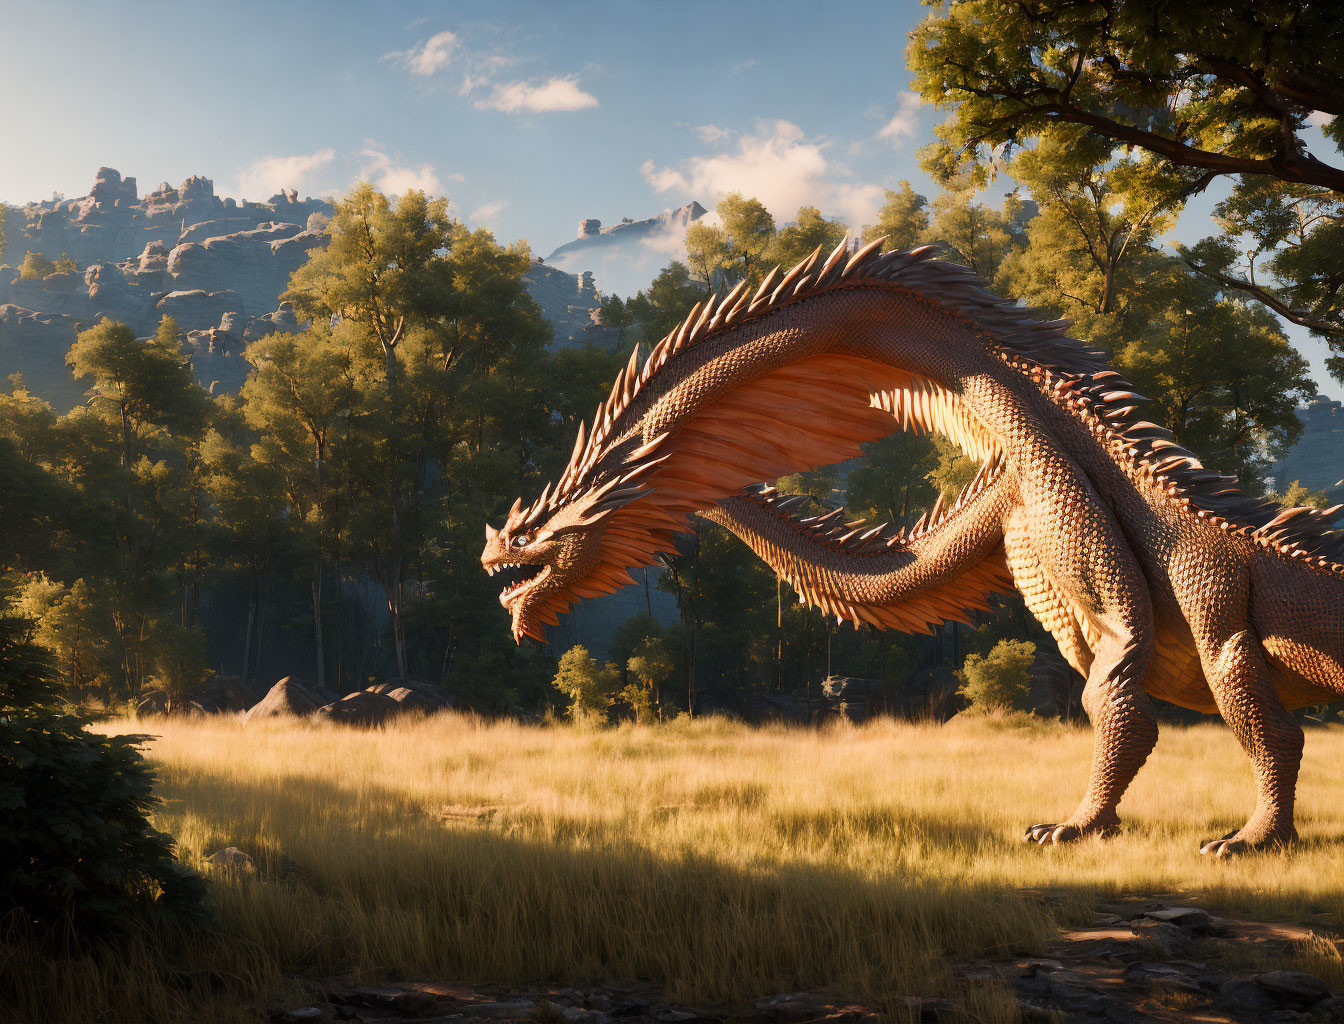 Orange Dragon in Sunlit Forest Clearing with Glinting Scales